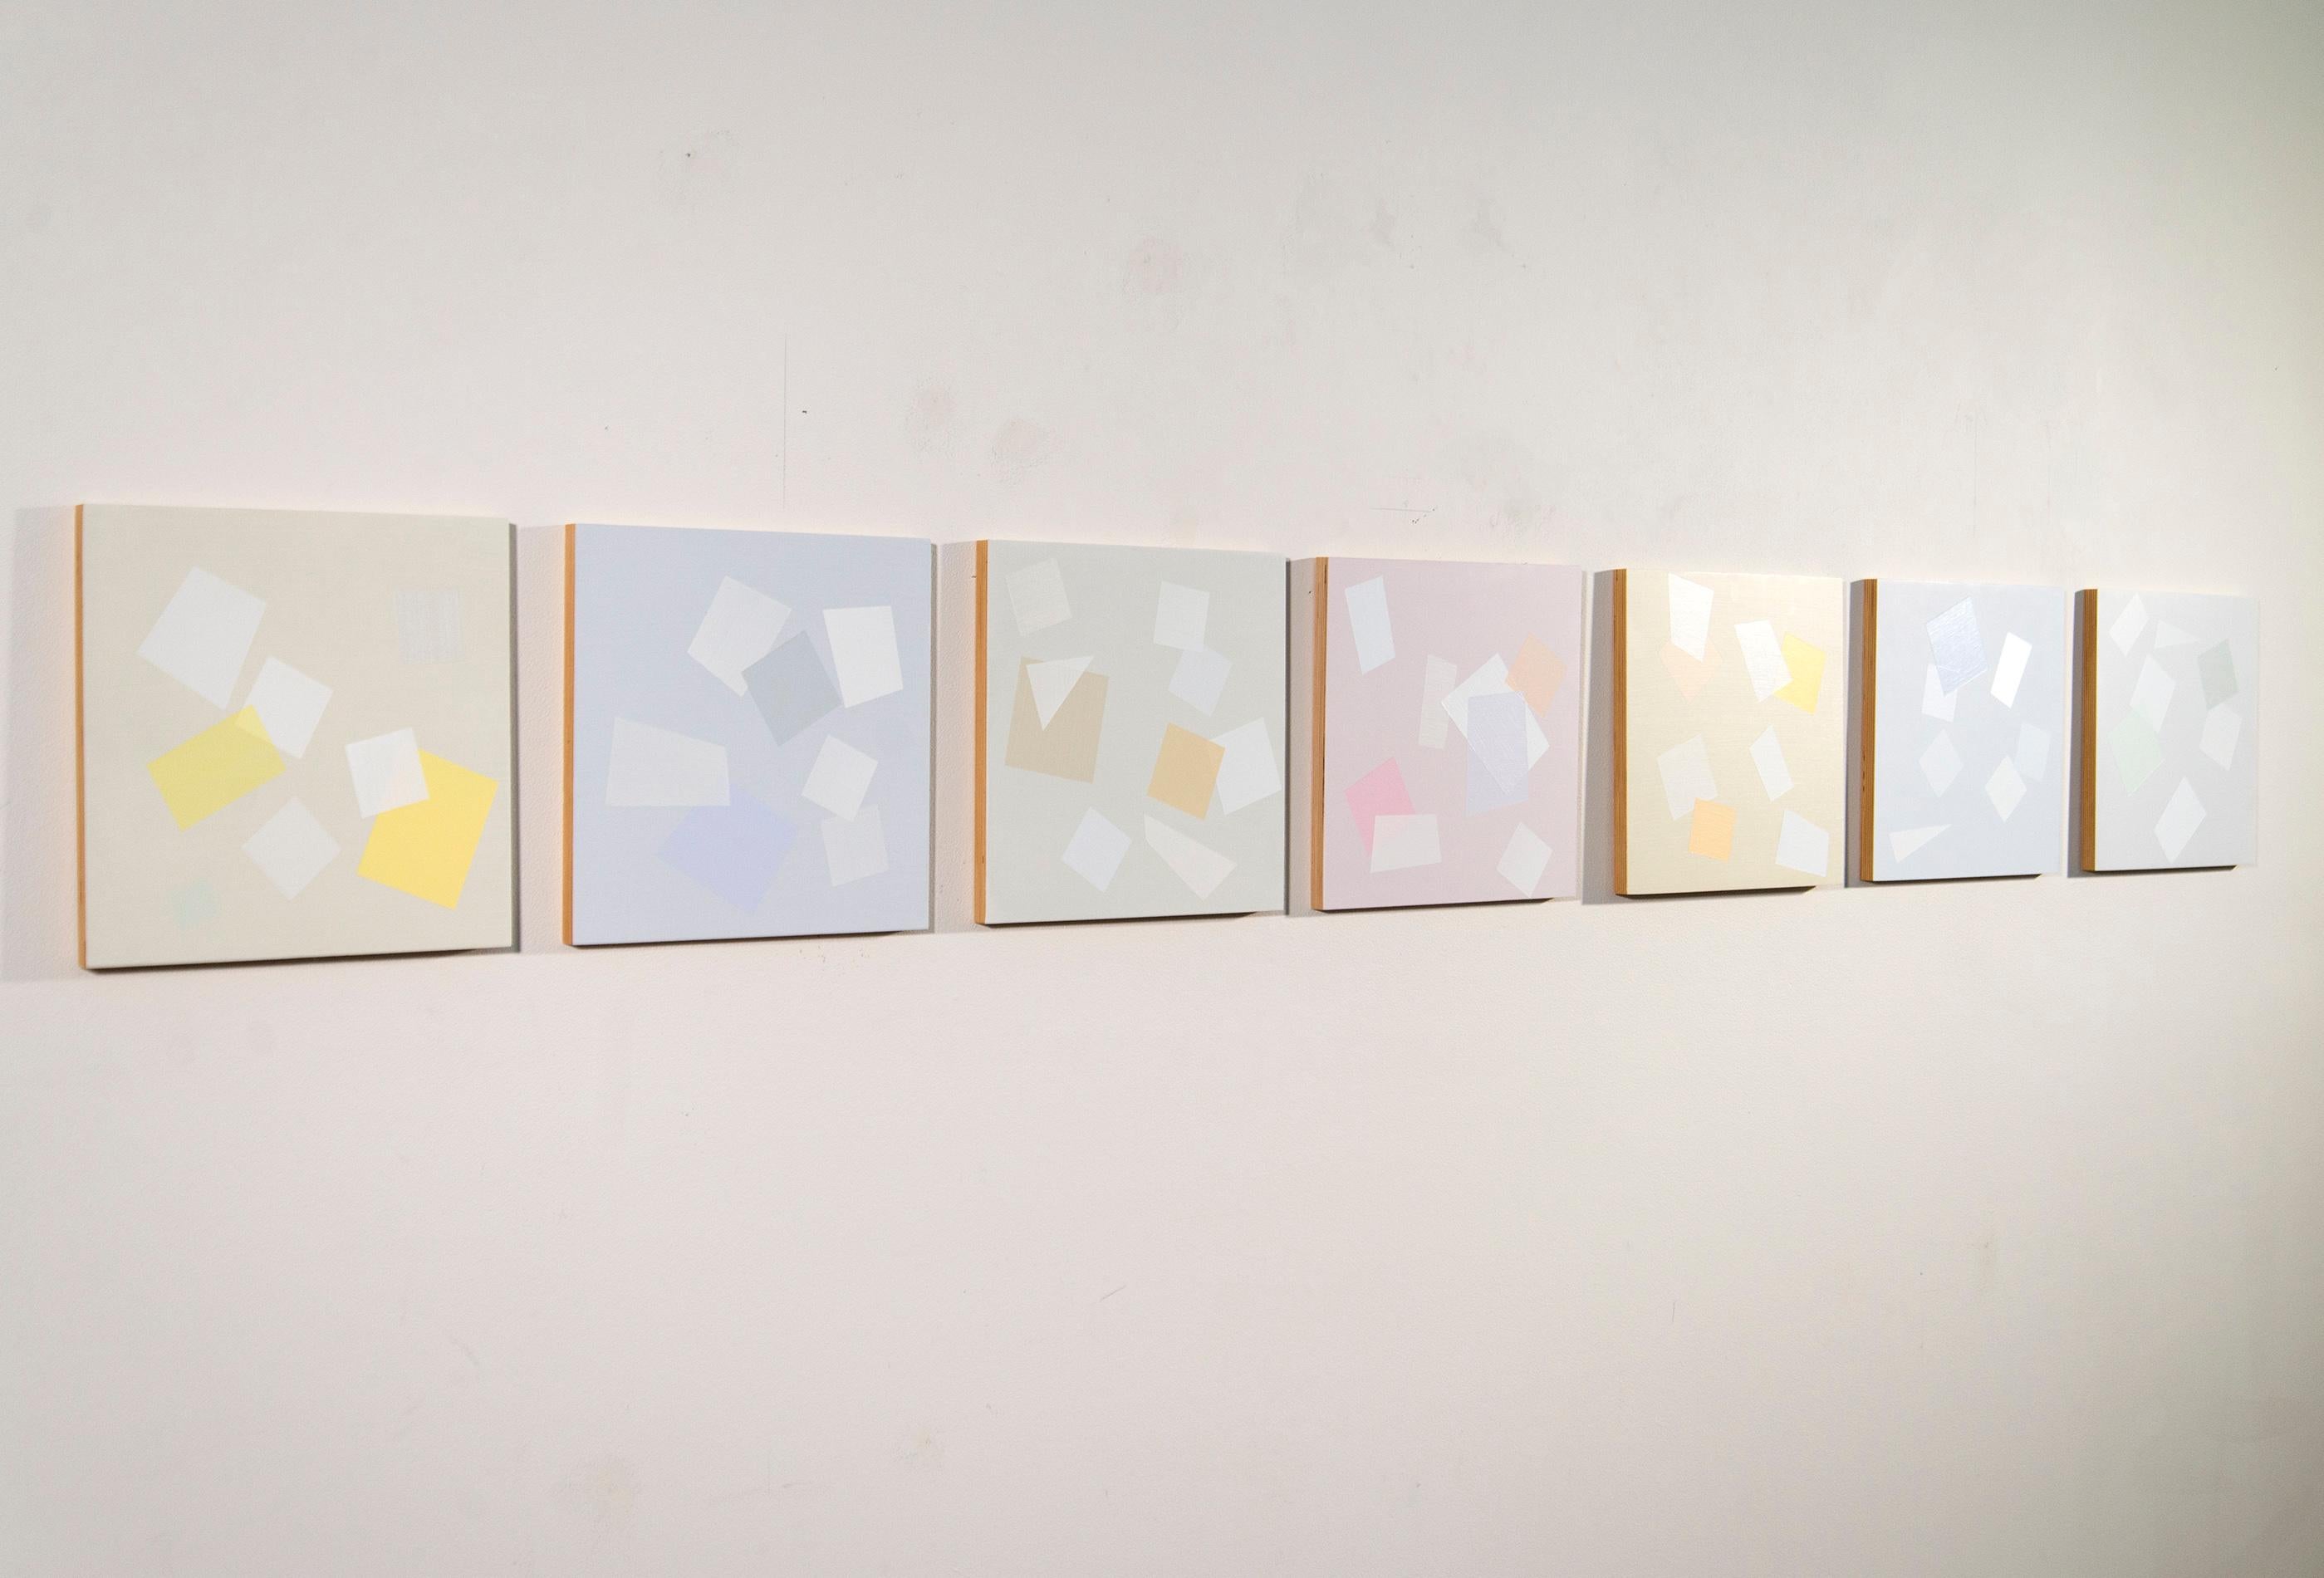 Milly Ristvedt named this lyrical abstract piece for Avro Part, the famous Estonian composer of classical and religious music. On seven panels precise geometric shapes in pastel colours—blue, pink, white and bright yellow appear to waltz around the